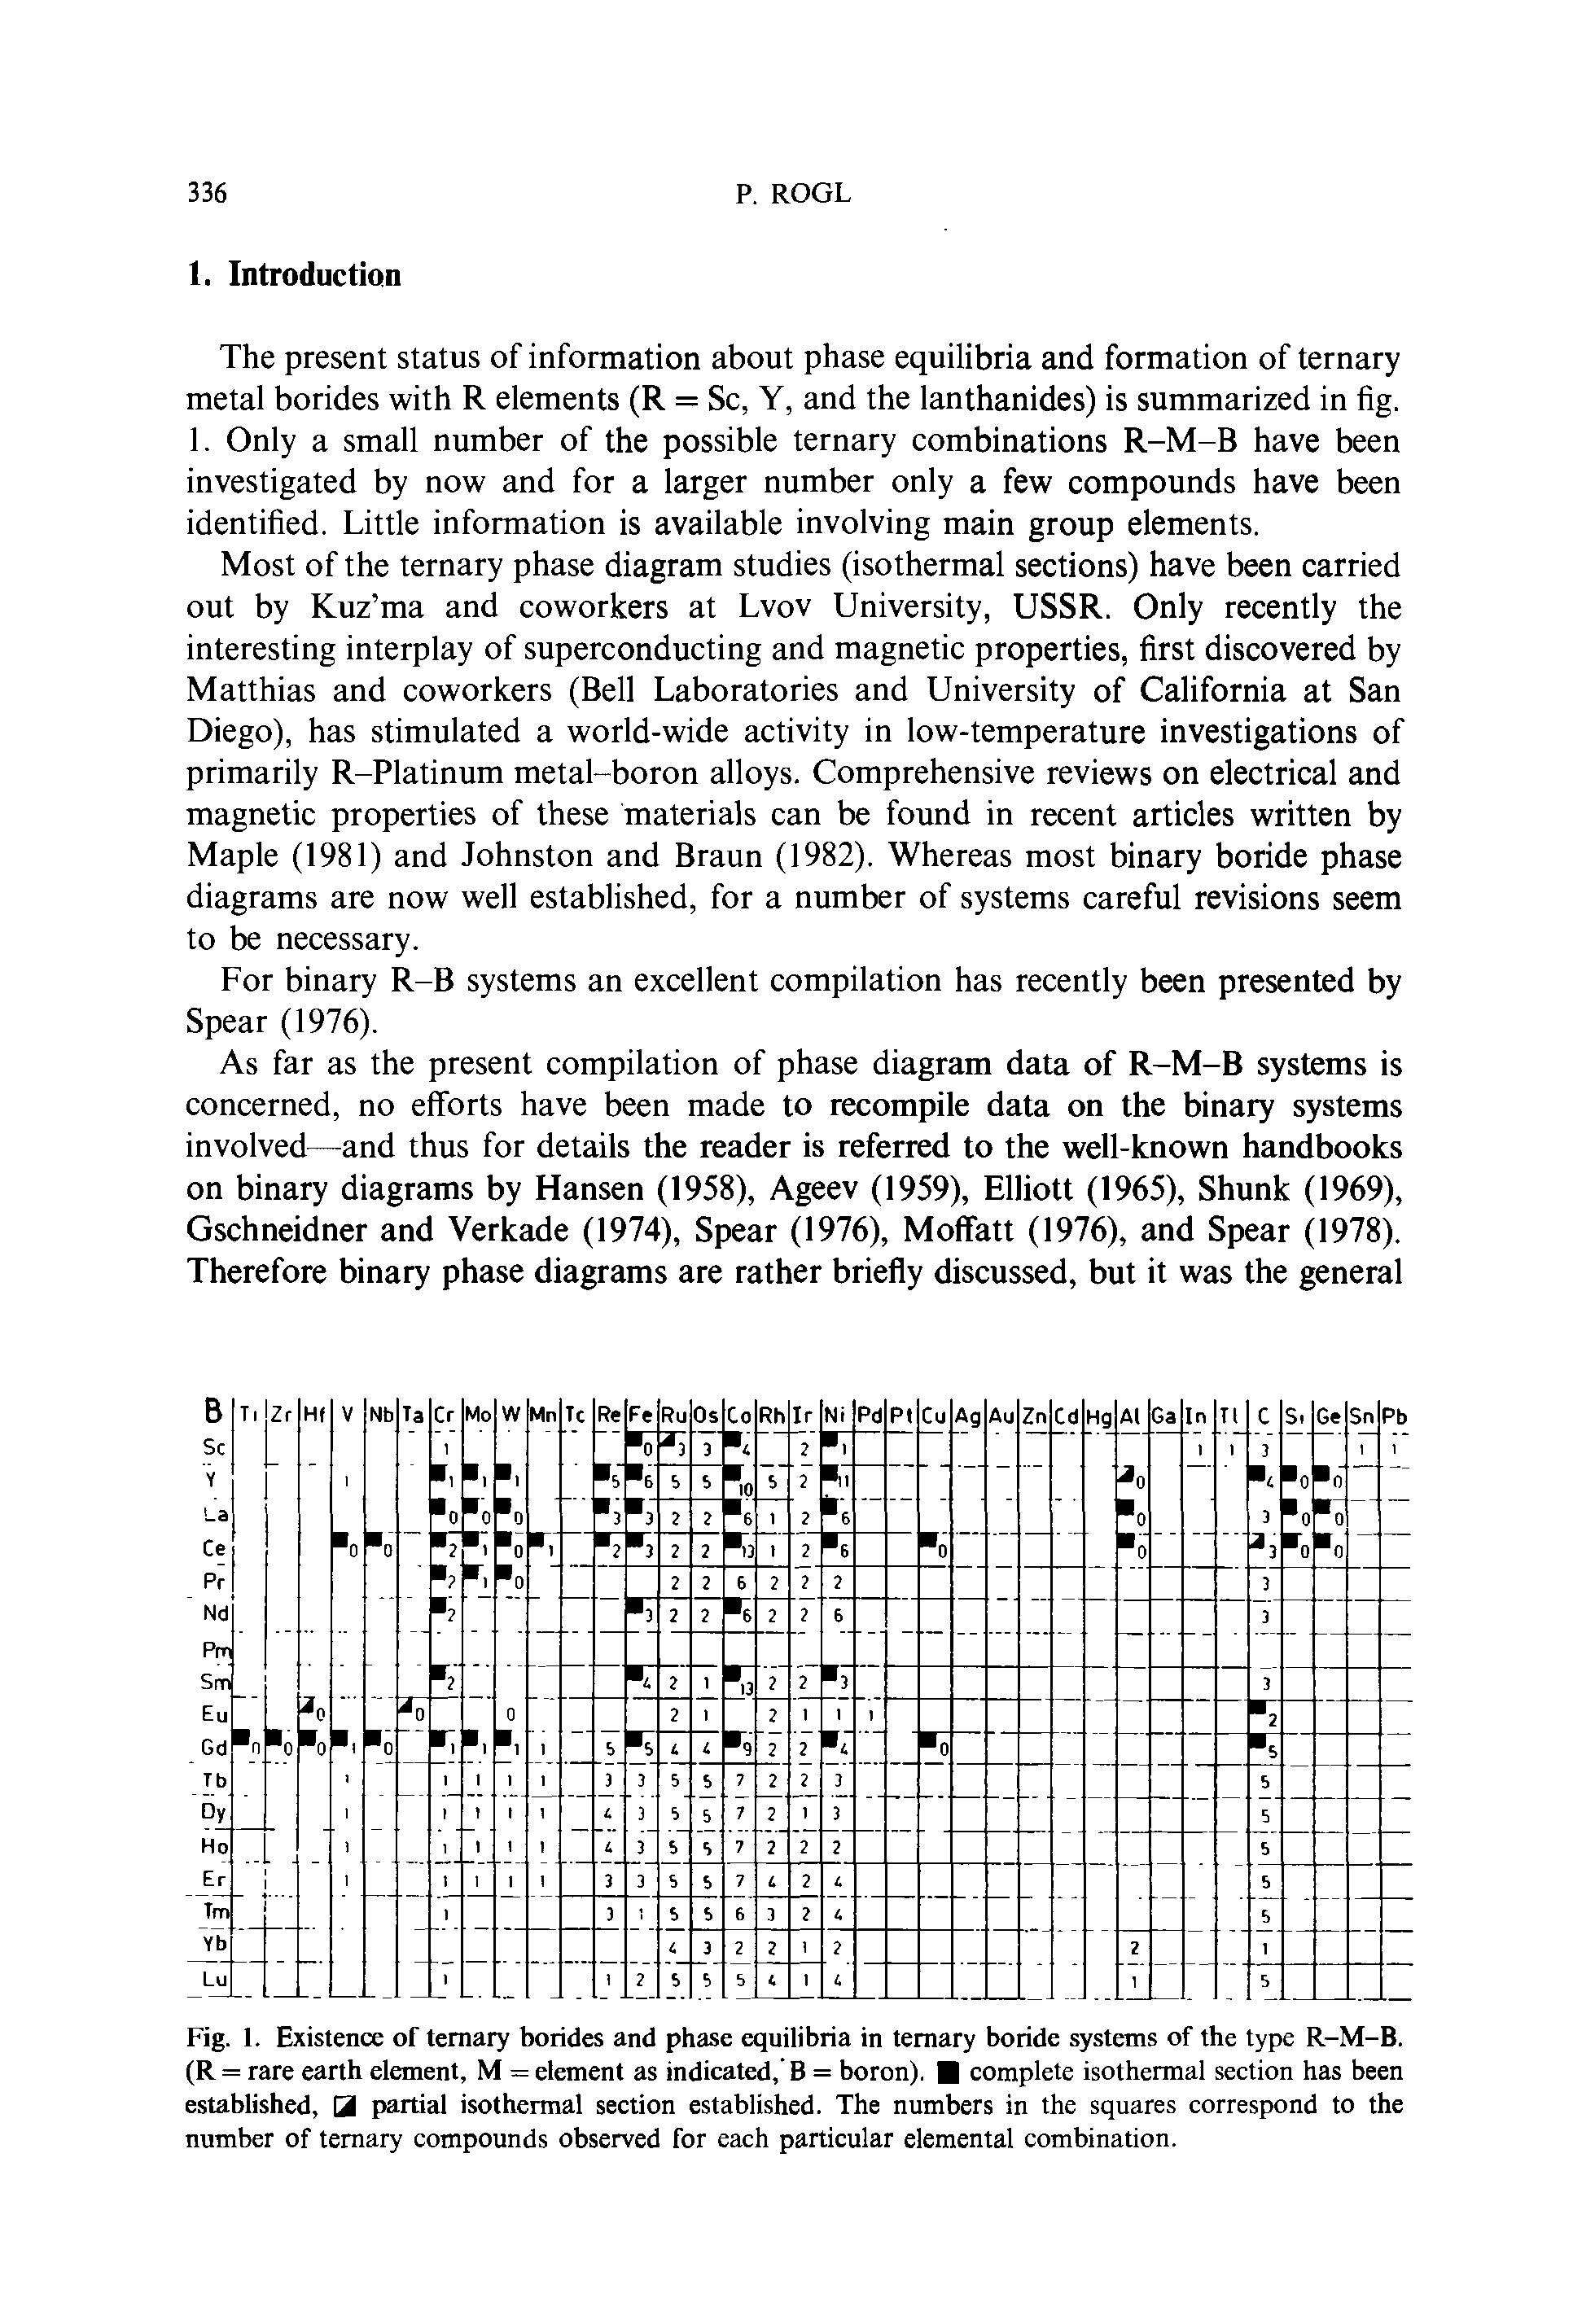 Fig. 1. Existence of ternary borides and phase equilibria in ternary boride systems of the type R-M-B. (R = rare earth element, M = element as indicated, B = boron). complete isothermal section has been established, Q1 partial isothermal section established. The numbers in the squares correspond to the number of ternary compounds observed for each particular elemental combination.